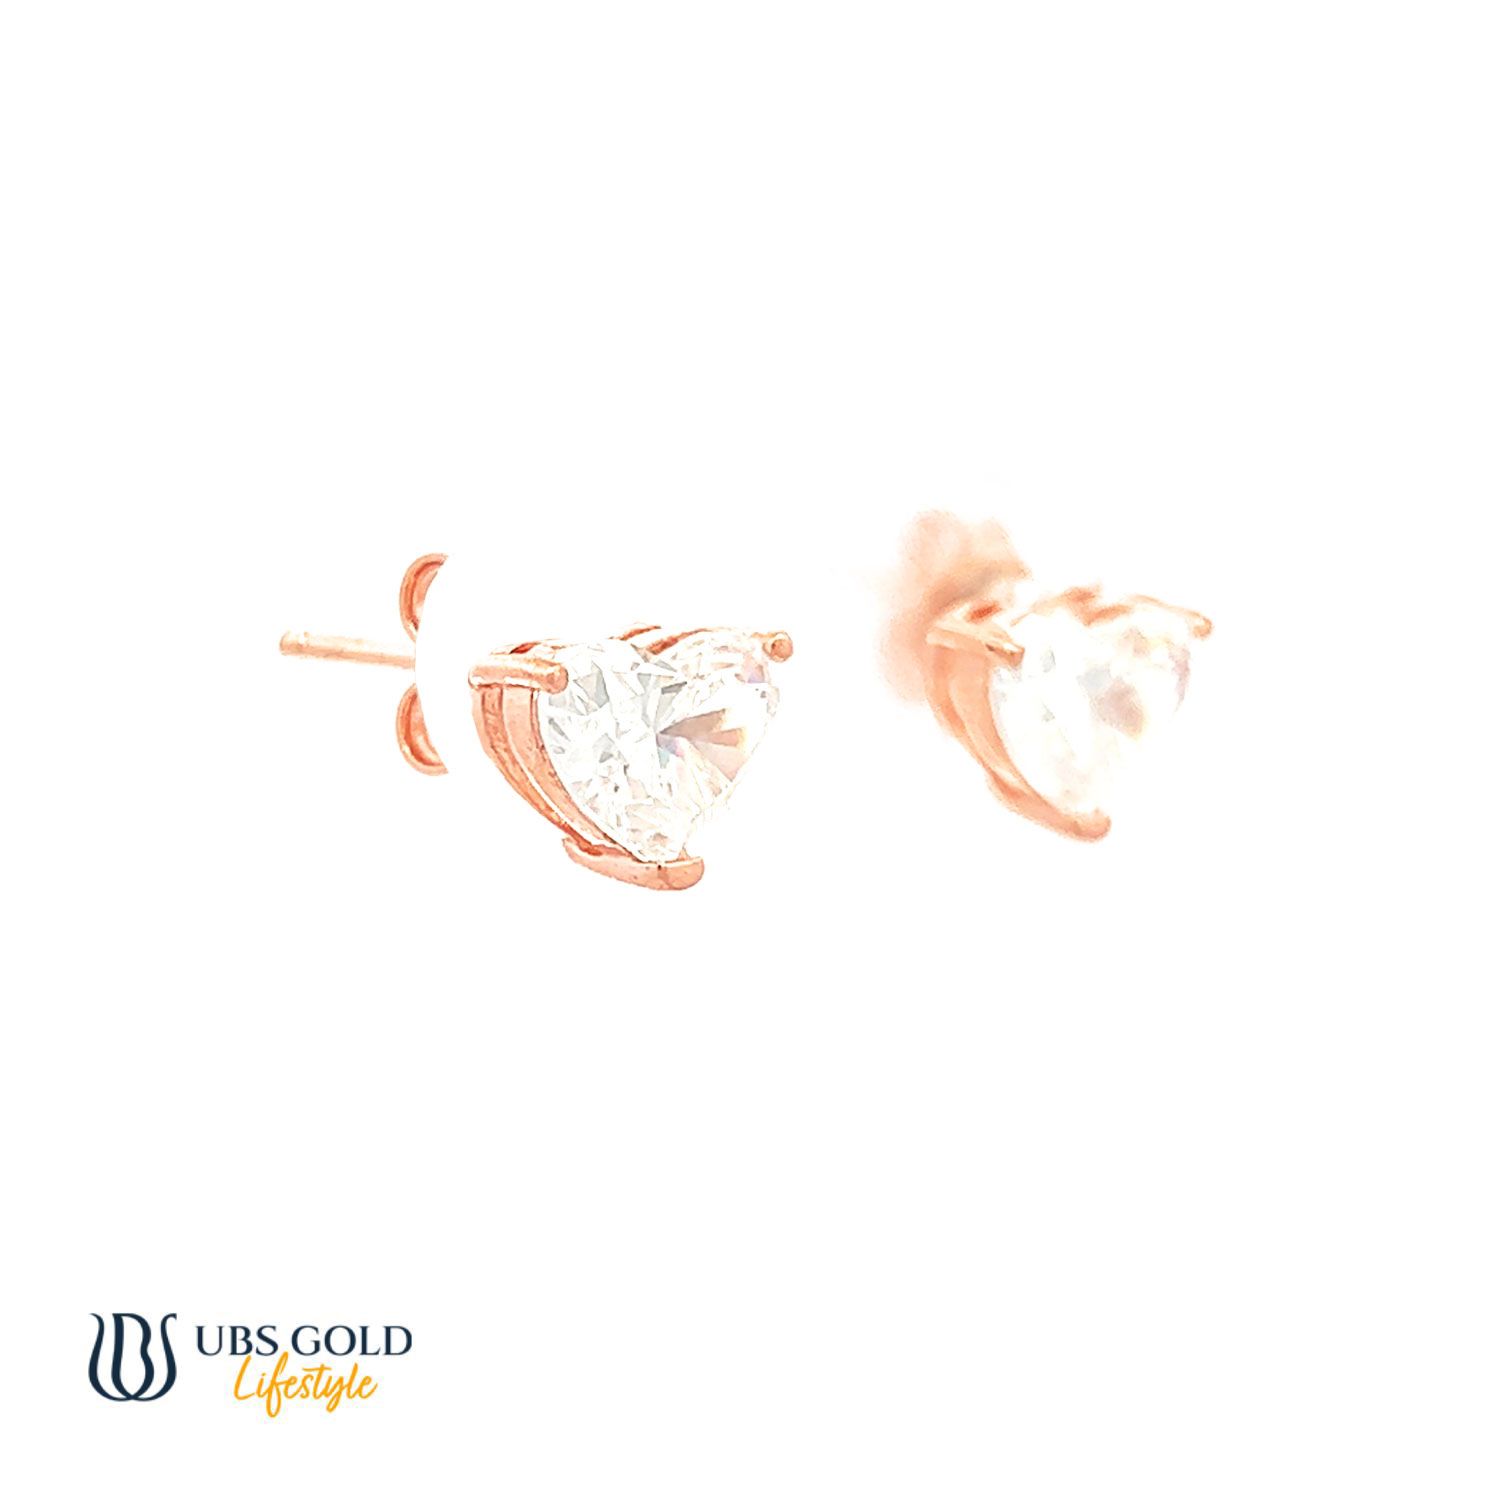 UBS Gold Anting Emas Serina Le Solitaire - Ksw0979 - 17K